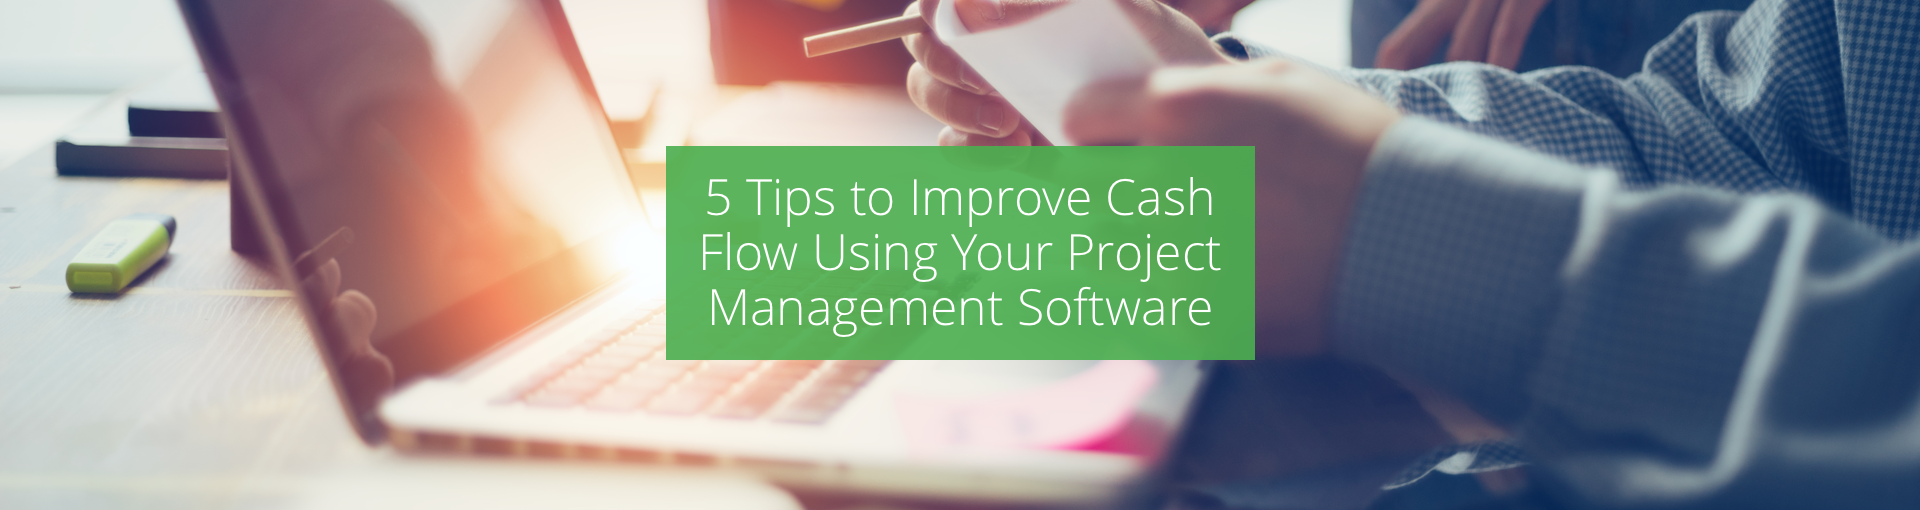 5 Tips to Improve Cash Flow Using Your Project Management Software Featured Image